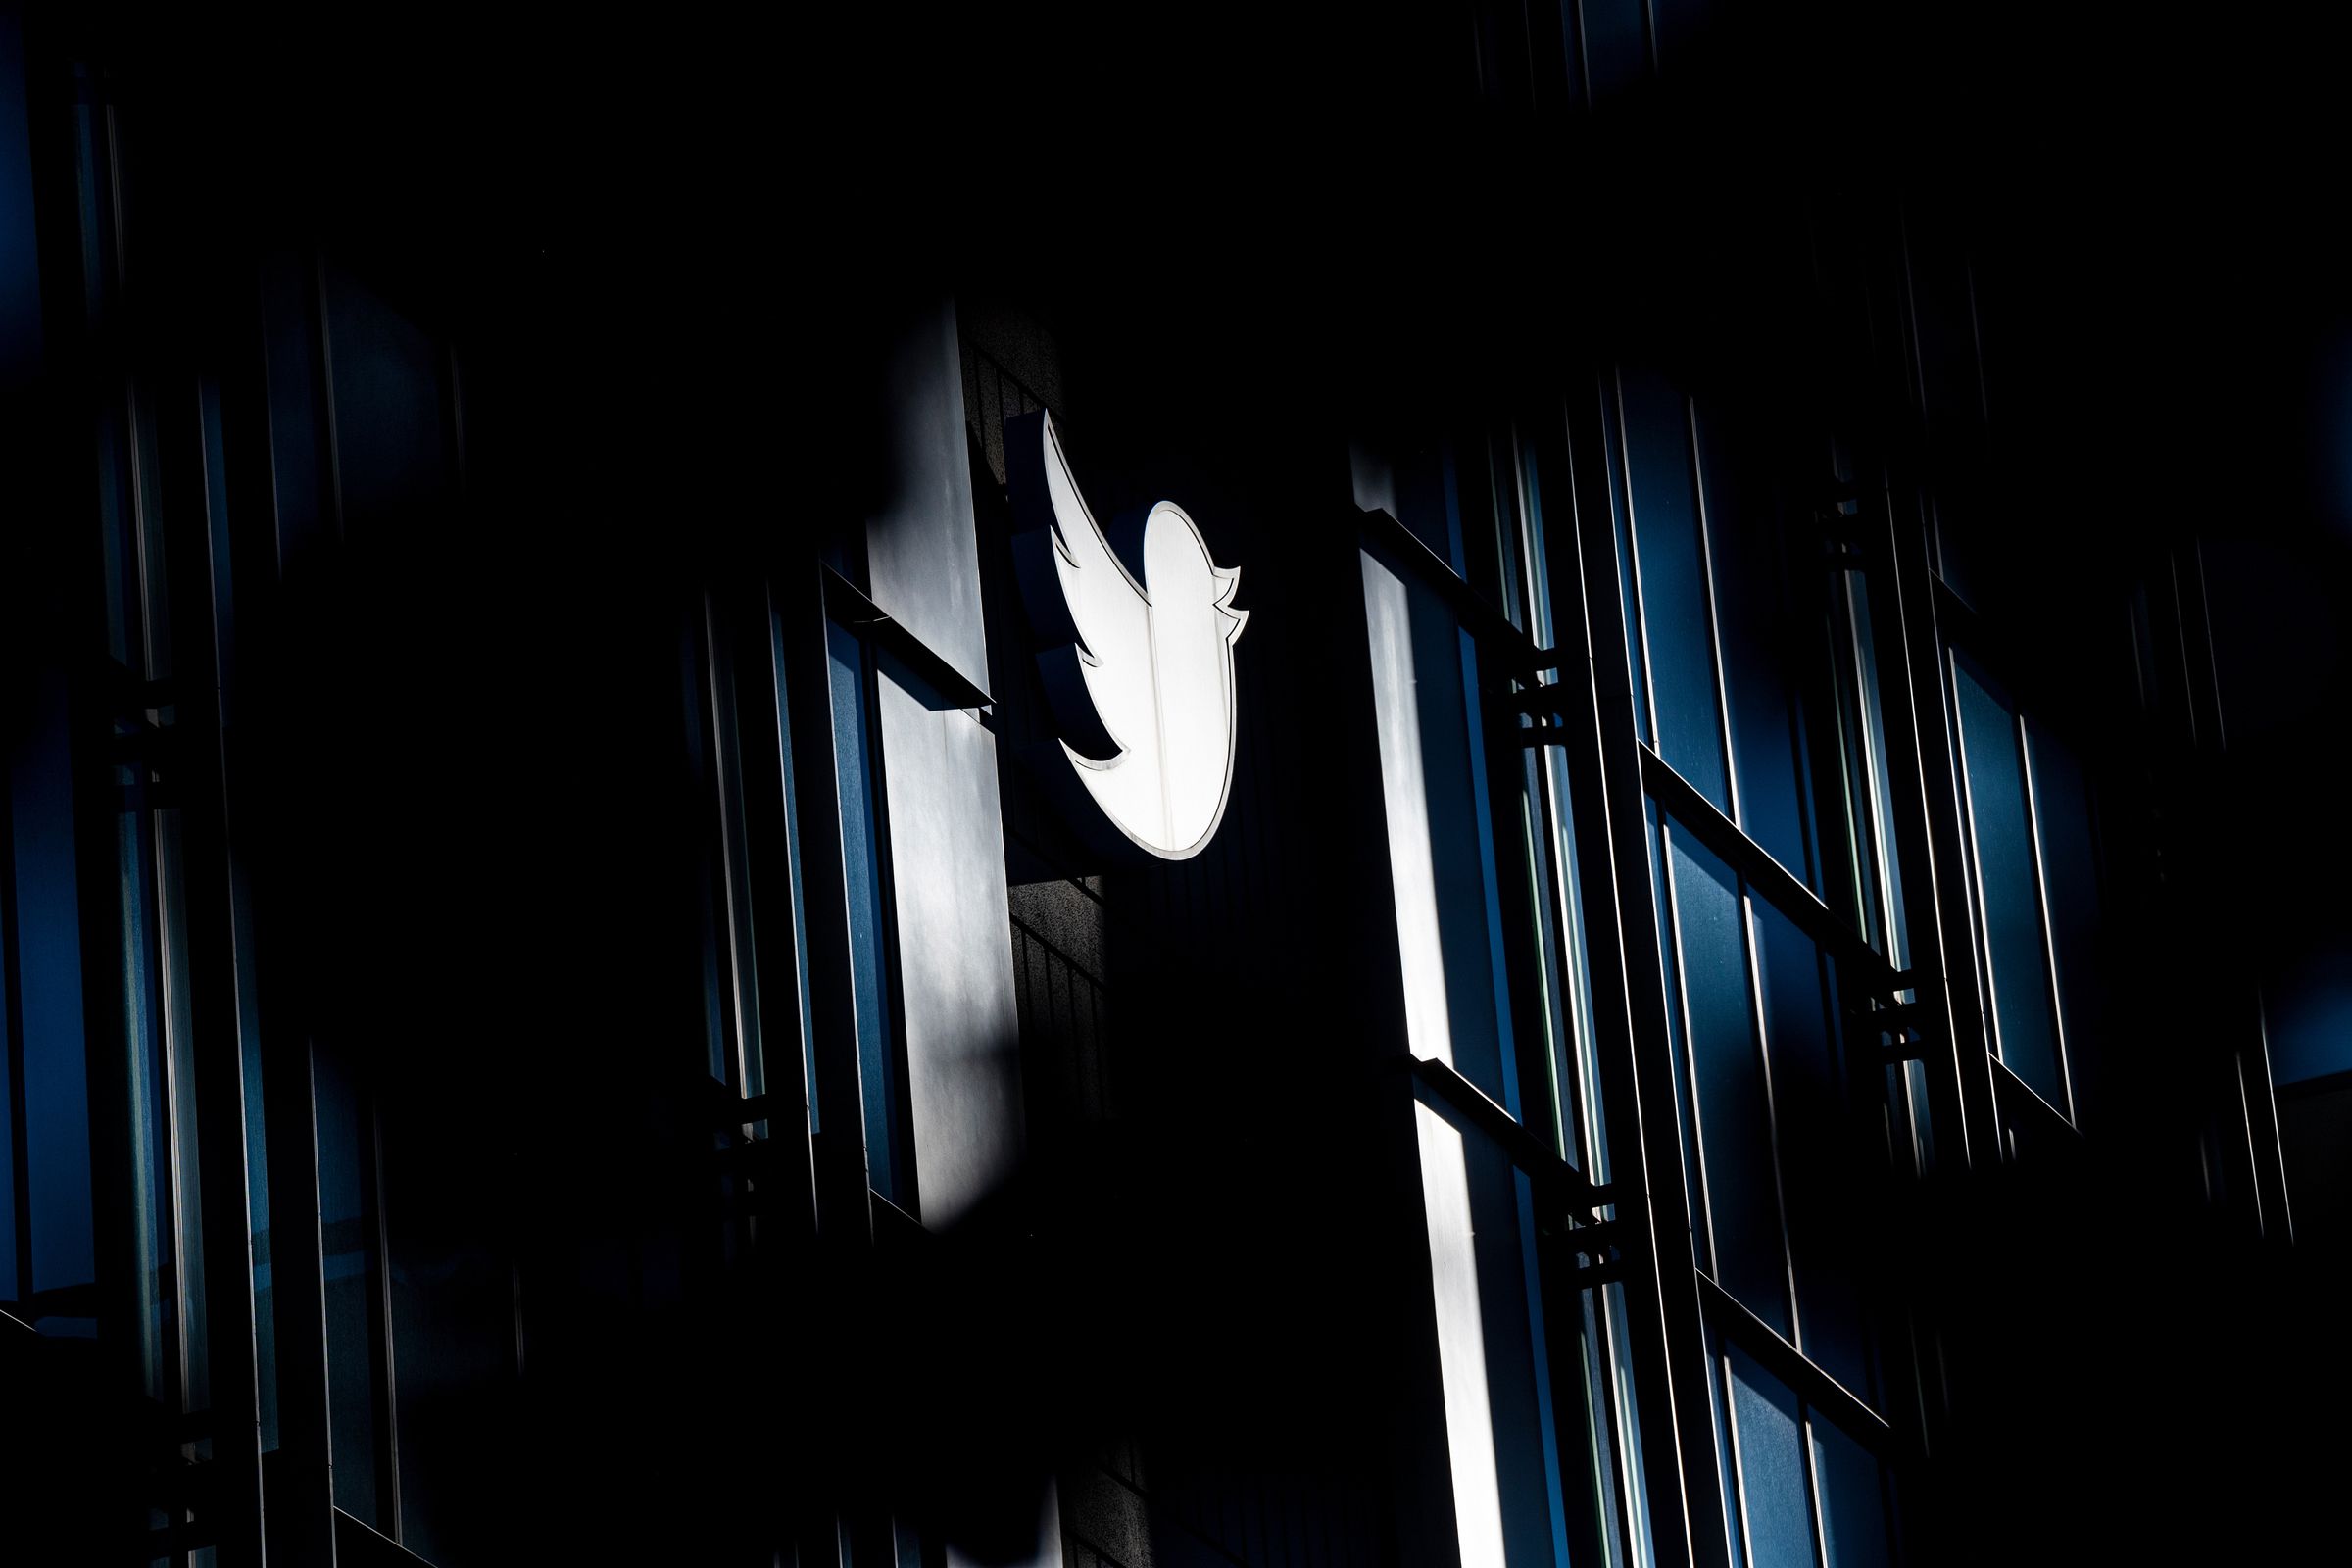 The Twitter logo, a bird, on the side of a building in shadow.